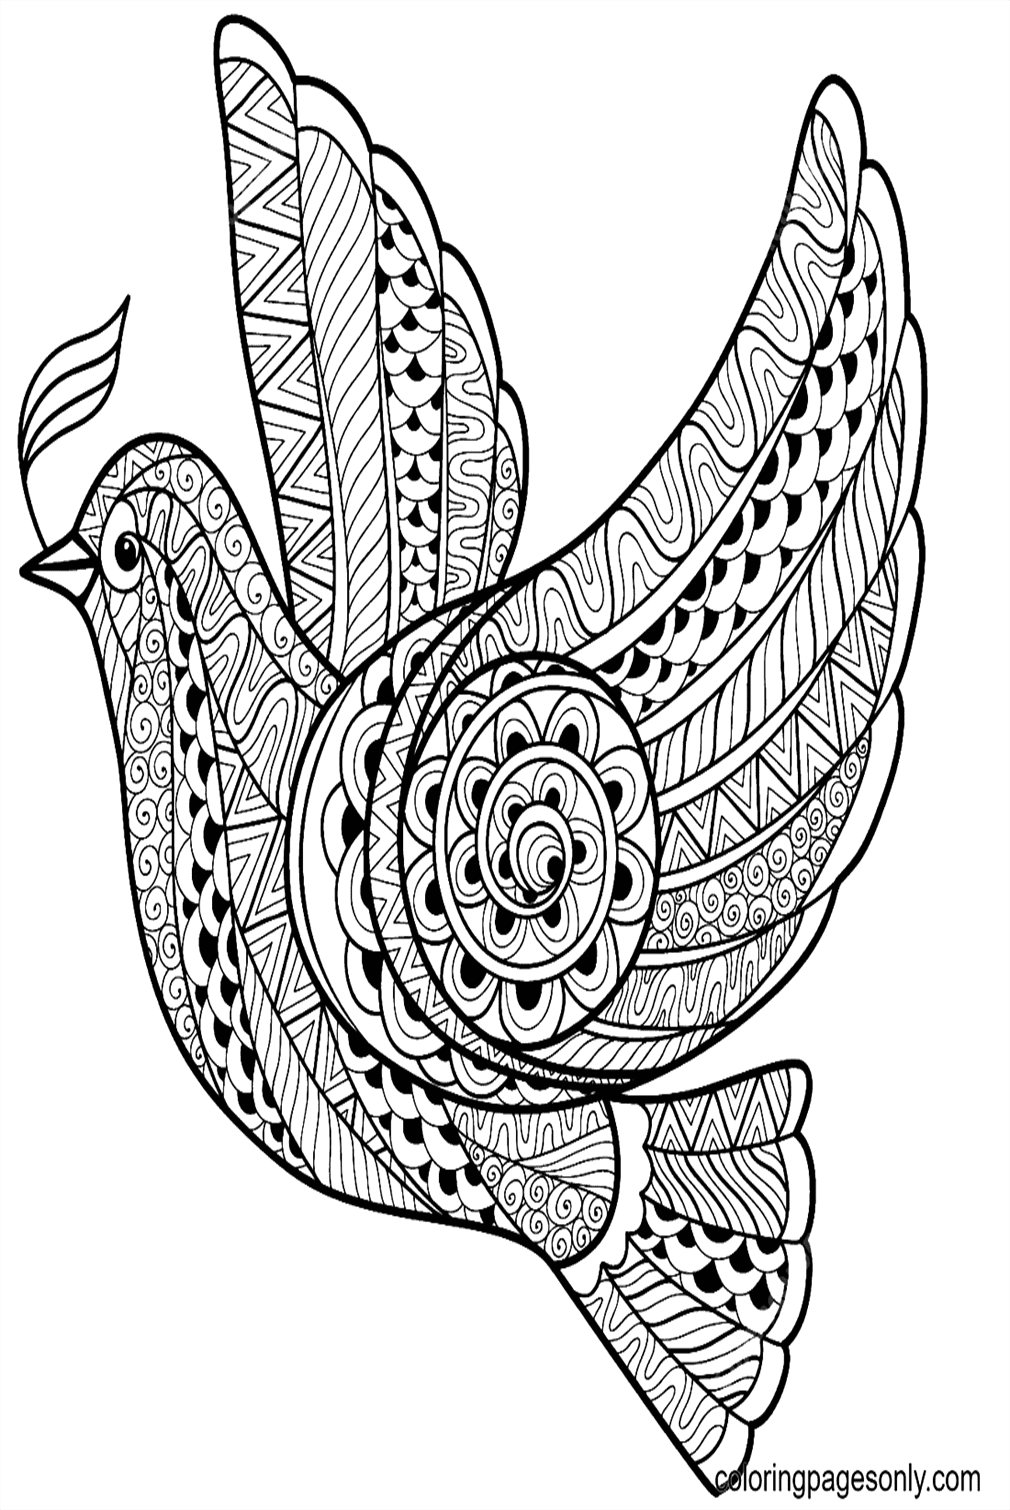 Peace Mindfulness Coloring Page